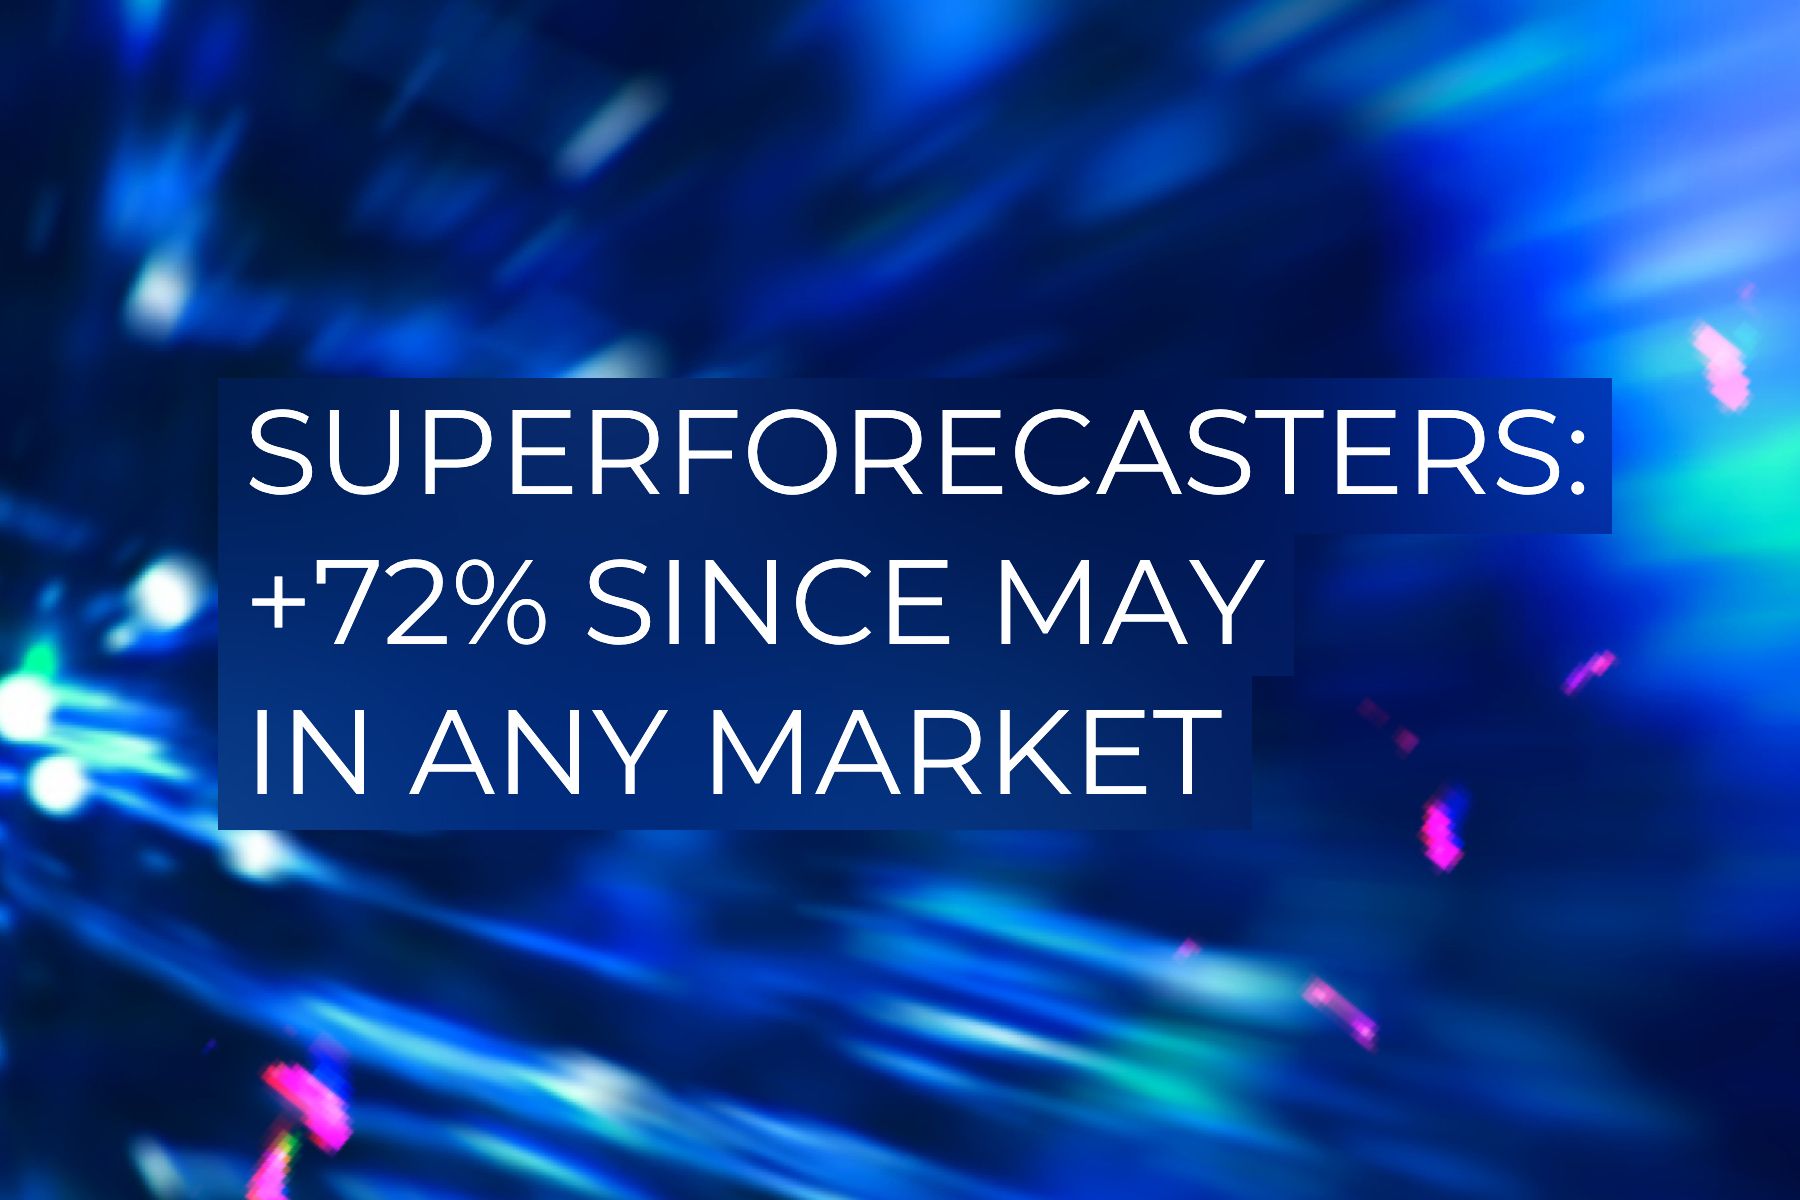 SuperForecasters: +72% since May in any market